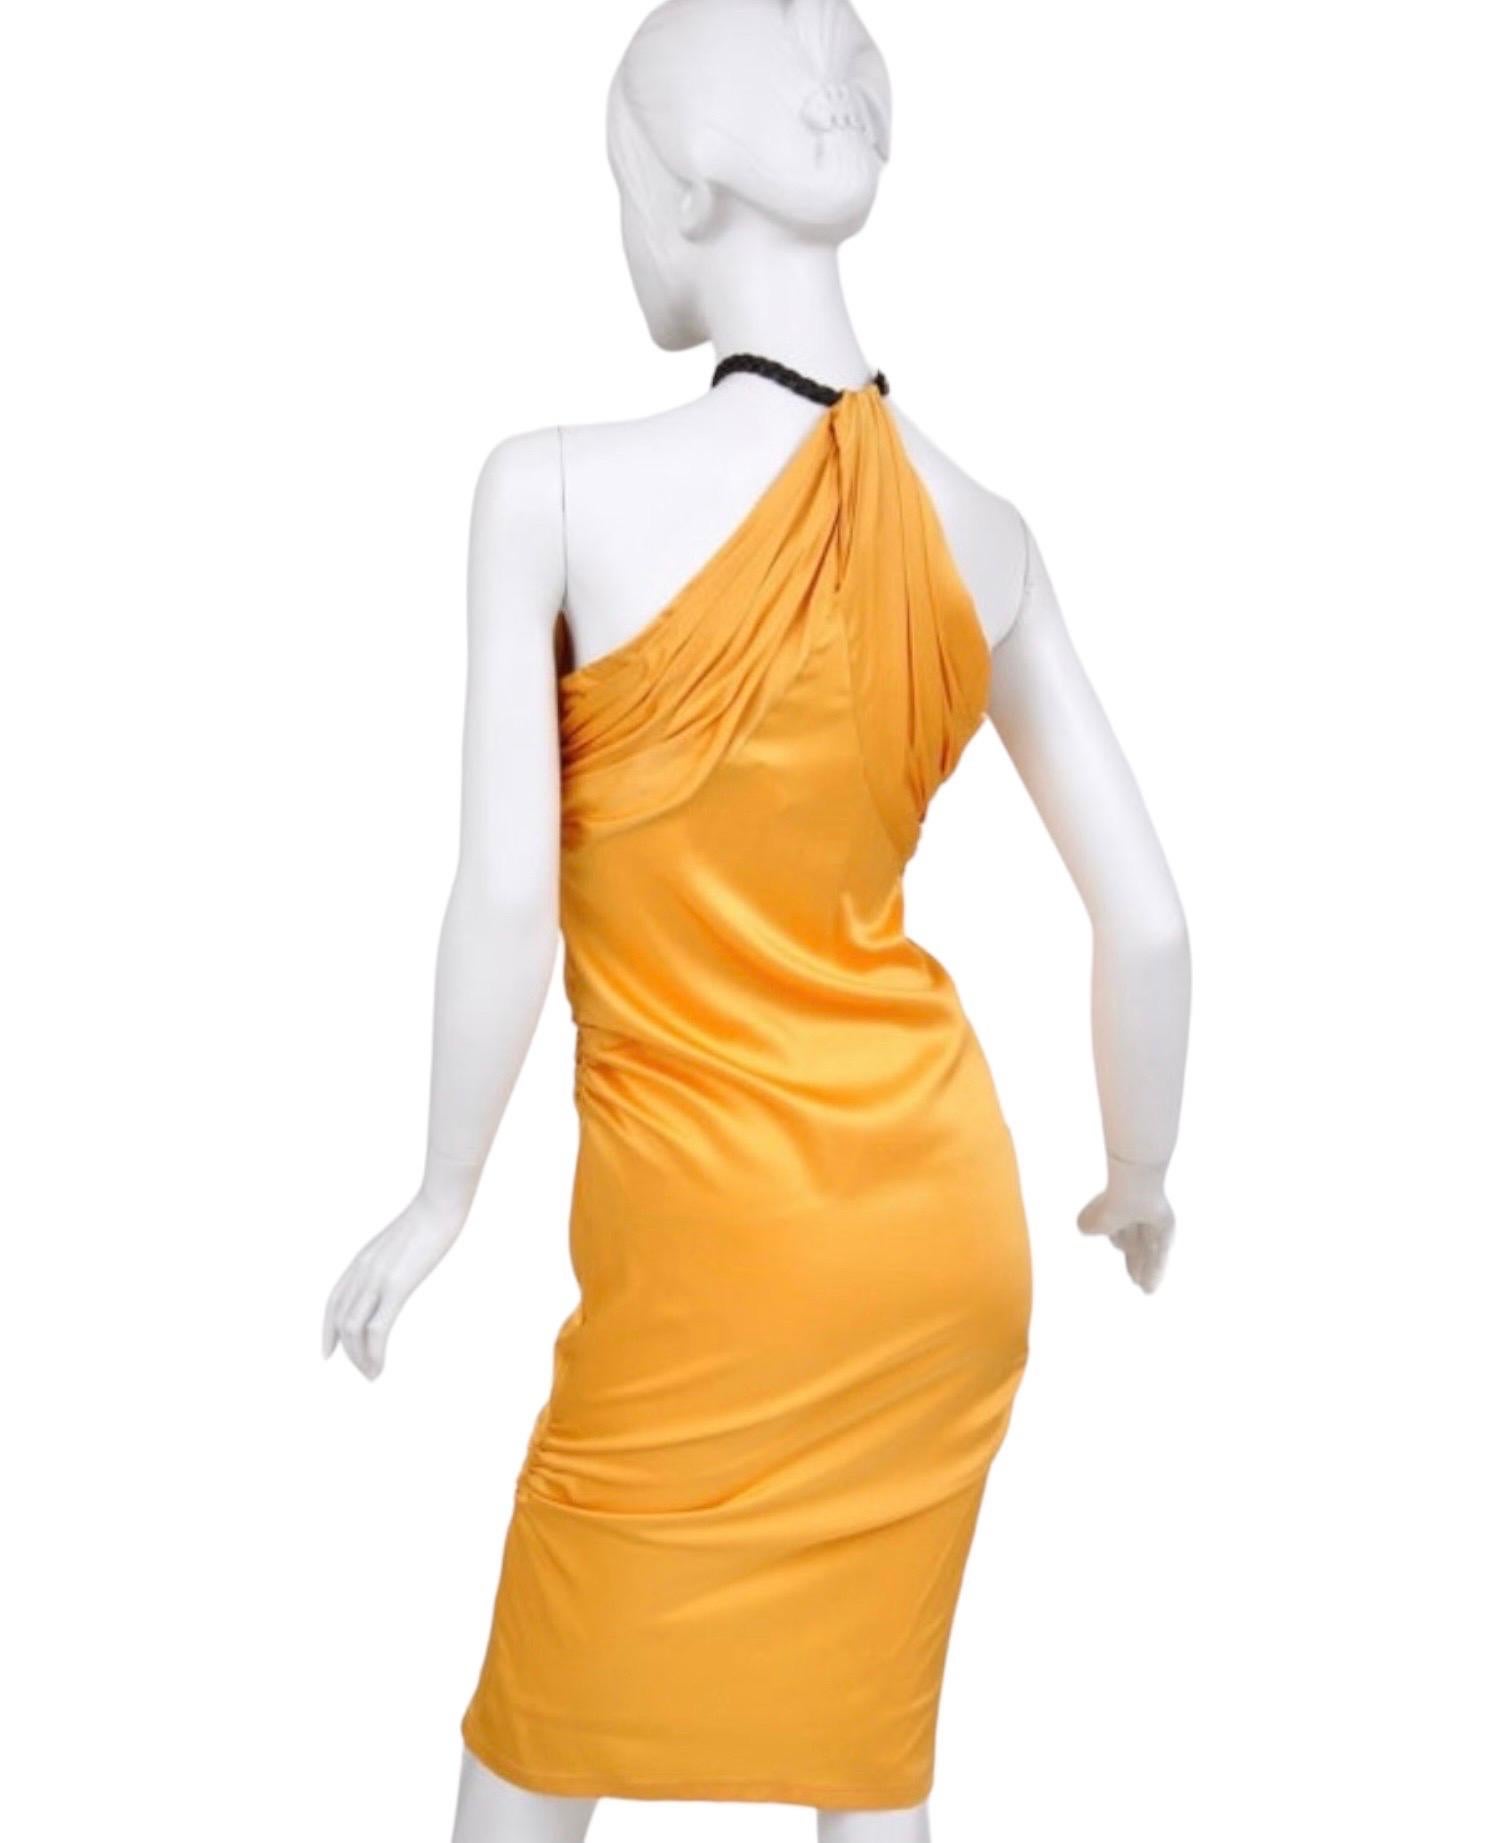  Vintage Tom Ford for Gucci 2004 Collection Yellow Silk Dress with Leather  In Excellent Condition For Sale In Montgomery, TX